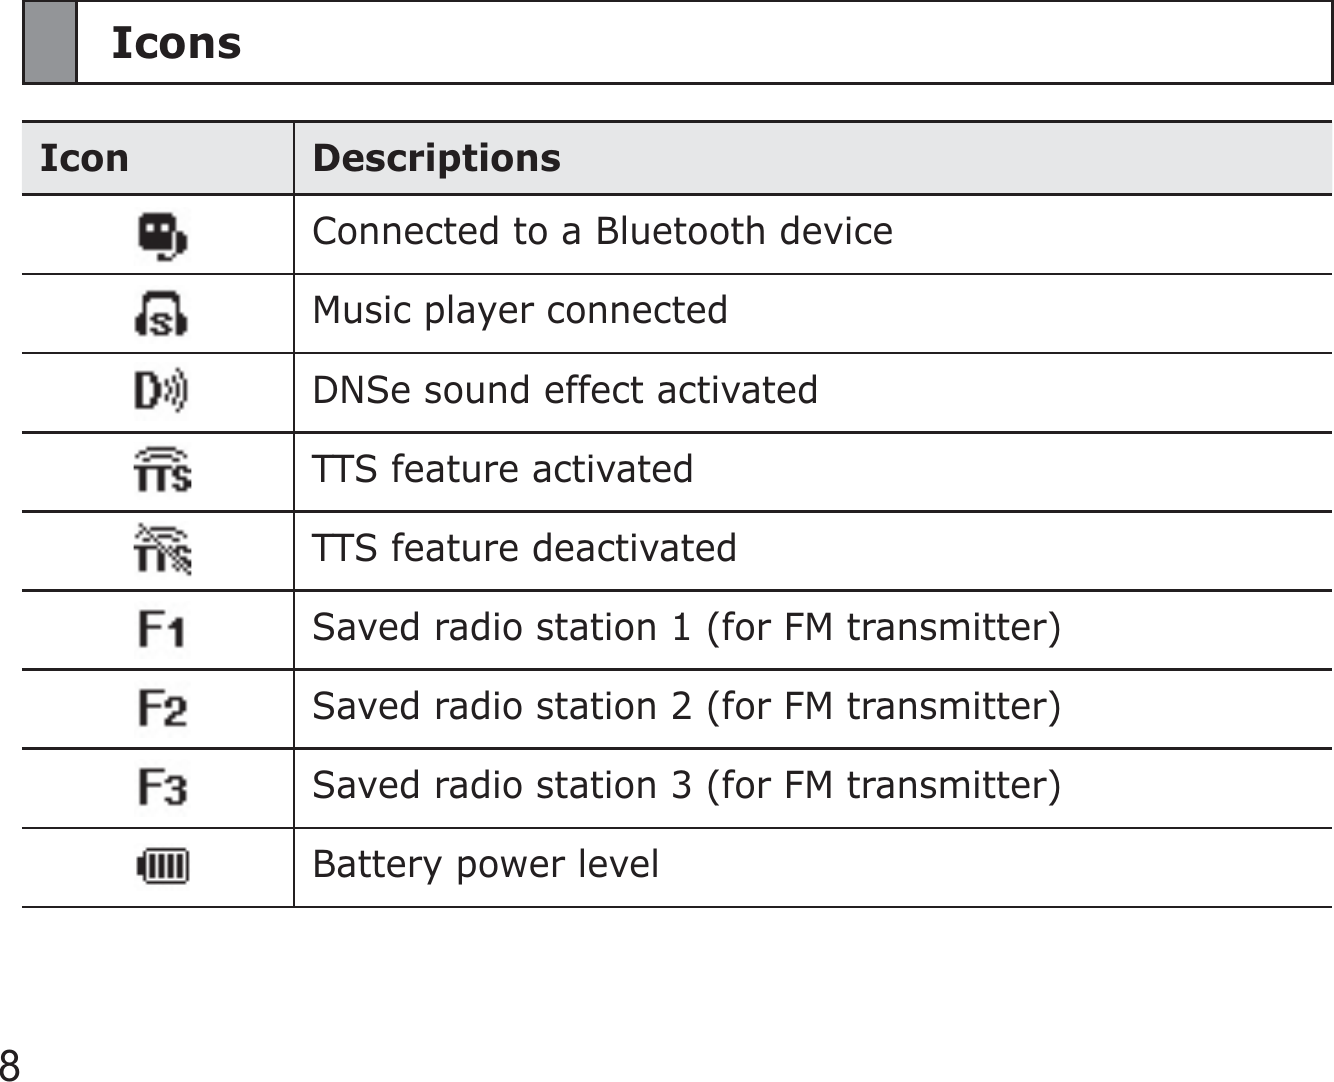 8IconsIcon DescriptionsConnected to a Bluetooth deviceMusic player connectedDNSe sound effect activatedTTS feature activatedTTS feature deactivatedSaved radio station 1 (for FM transmitter)Saved radio station 2 (for FM transmitter)Saved radio station 3 (for FM transmitter)Battery power level